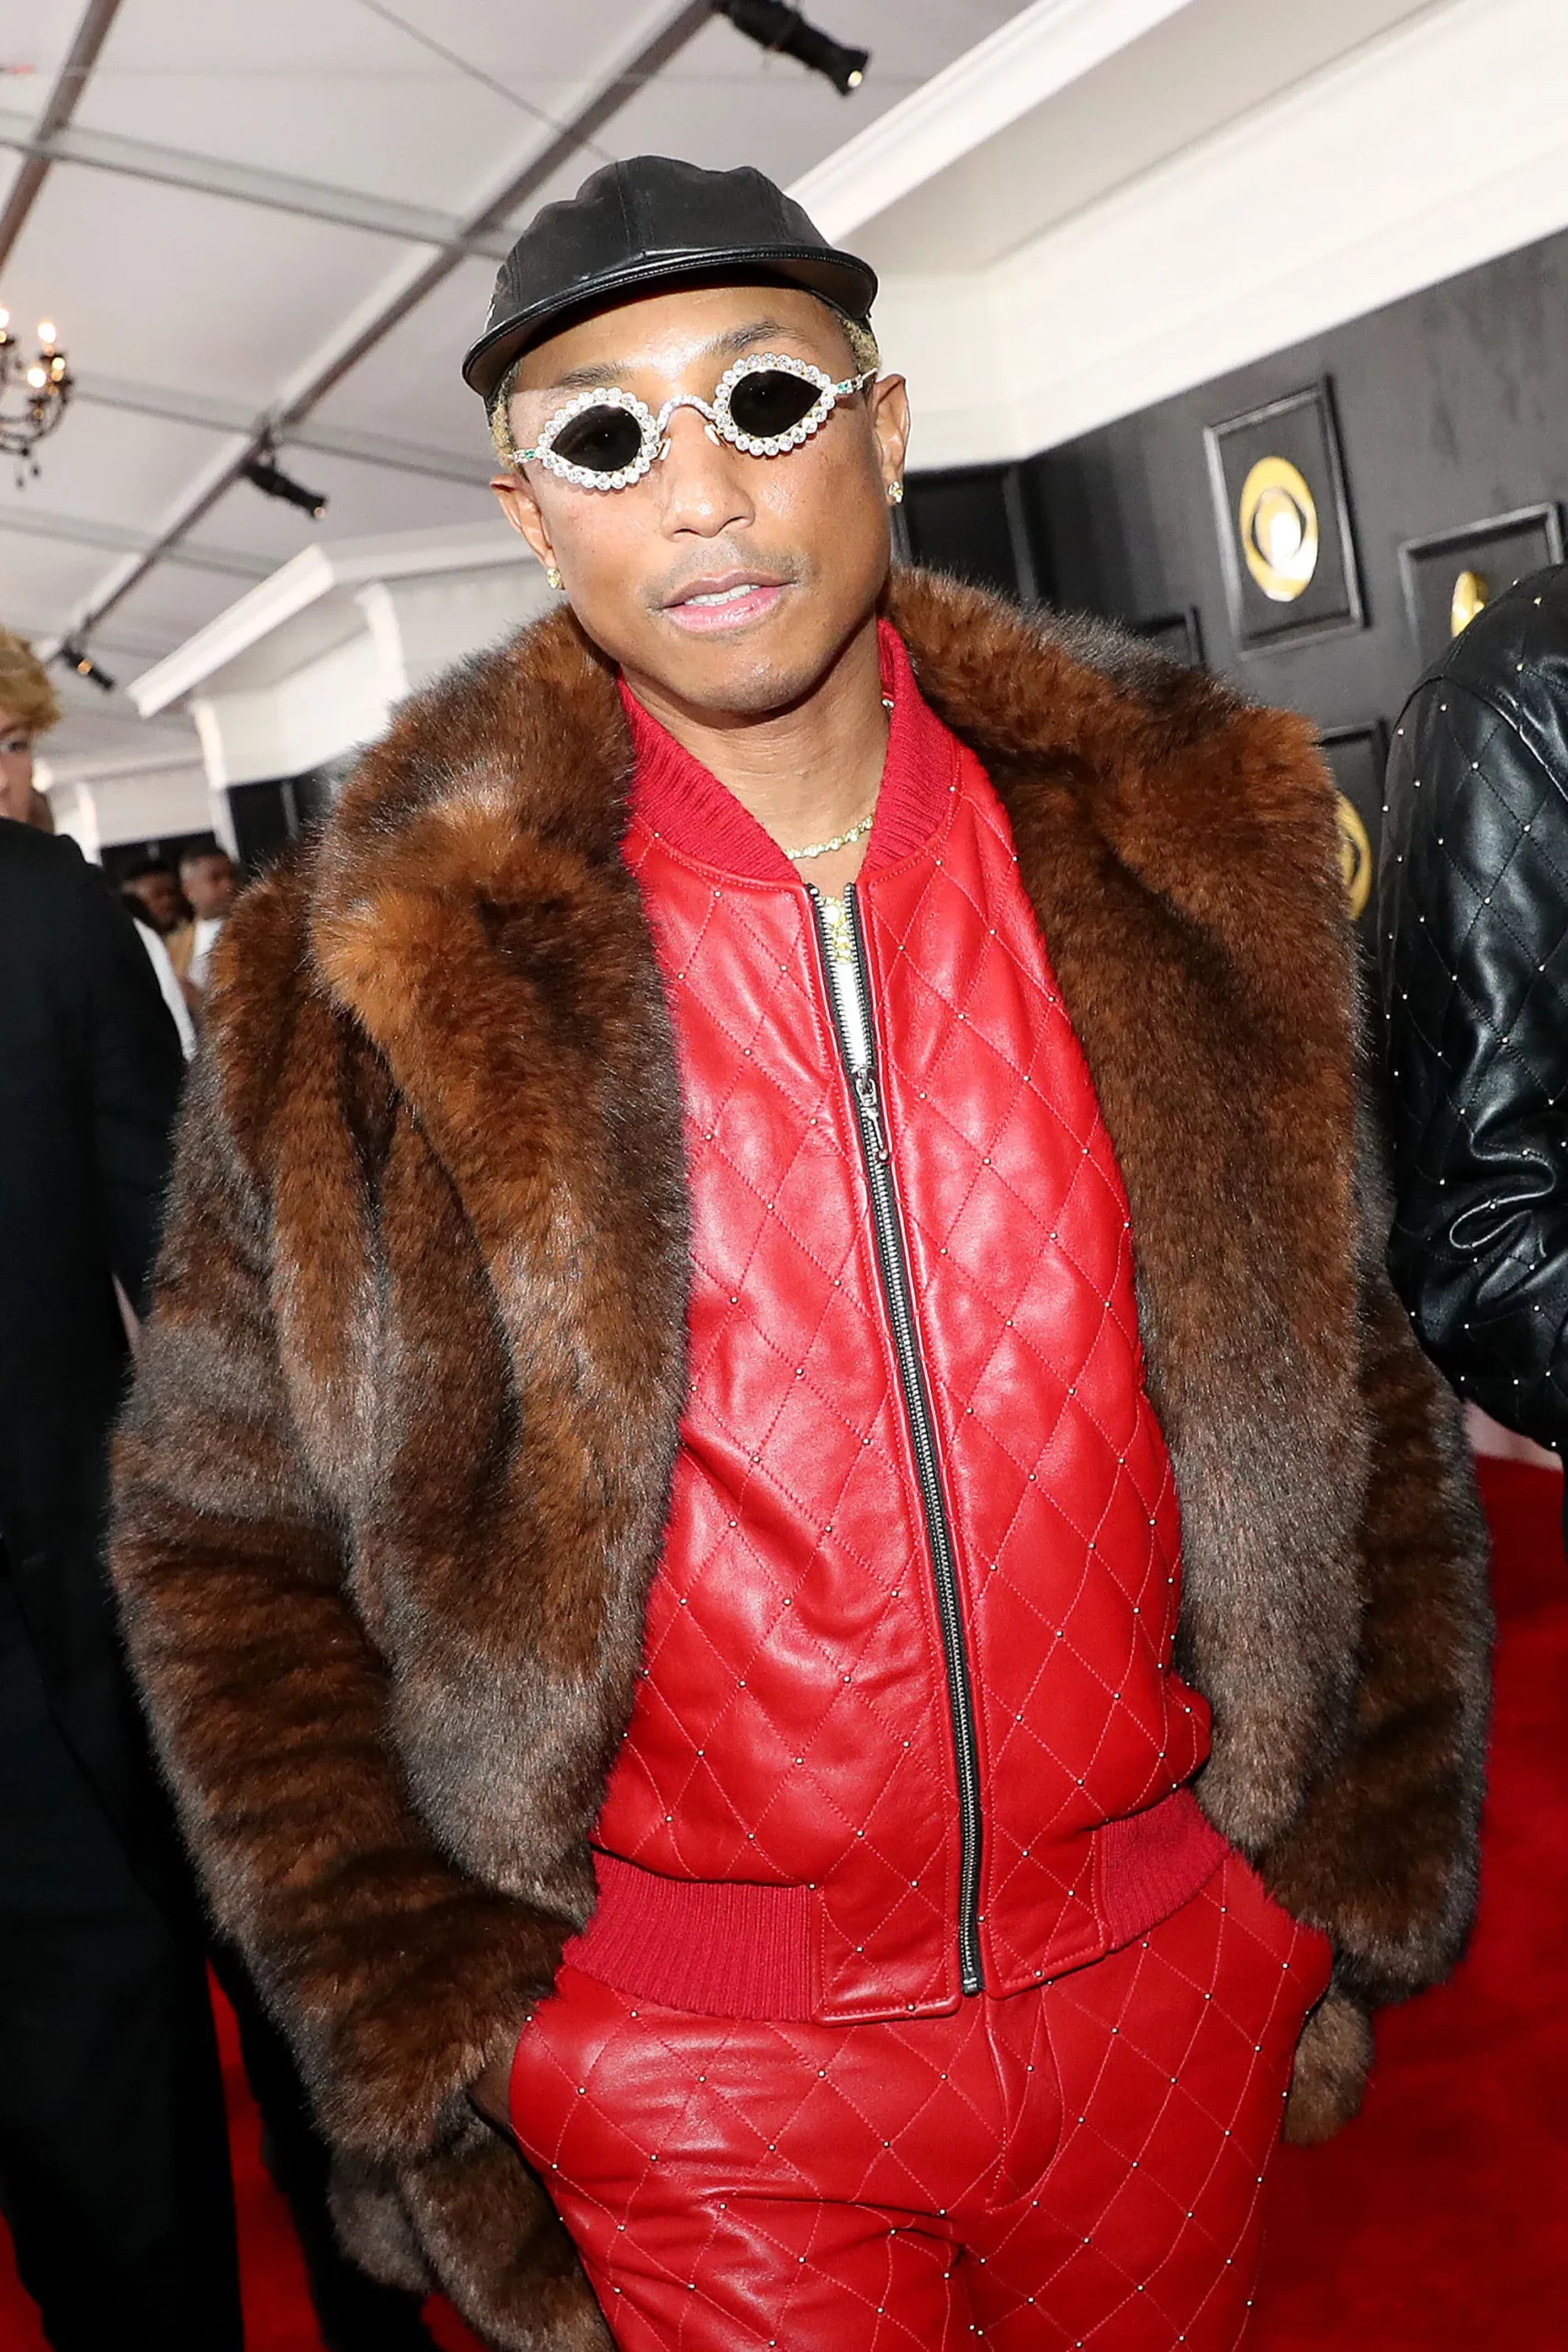 Louis Vuitton Appoints Pharrell Williams as its New Men's Creative Director  - The Vault